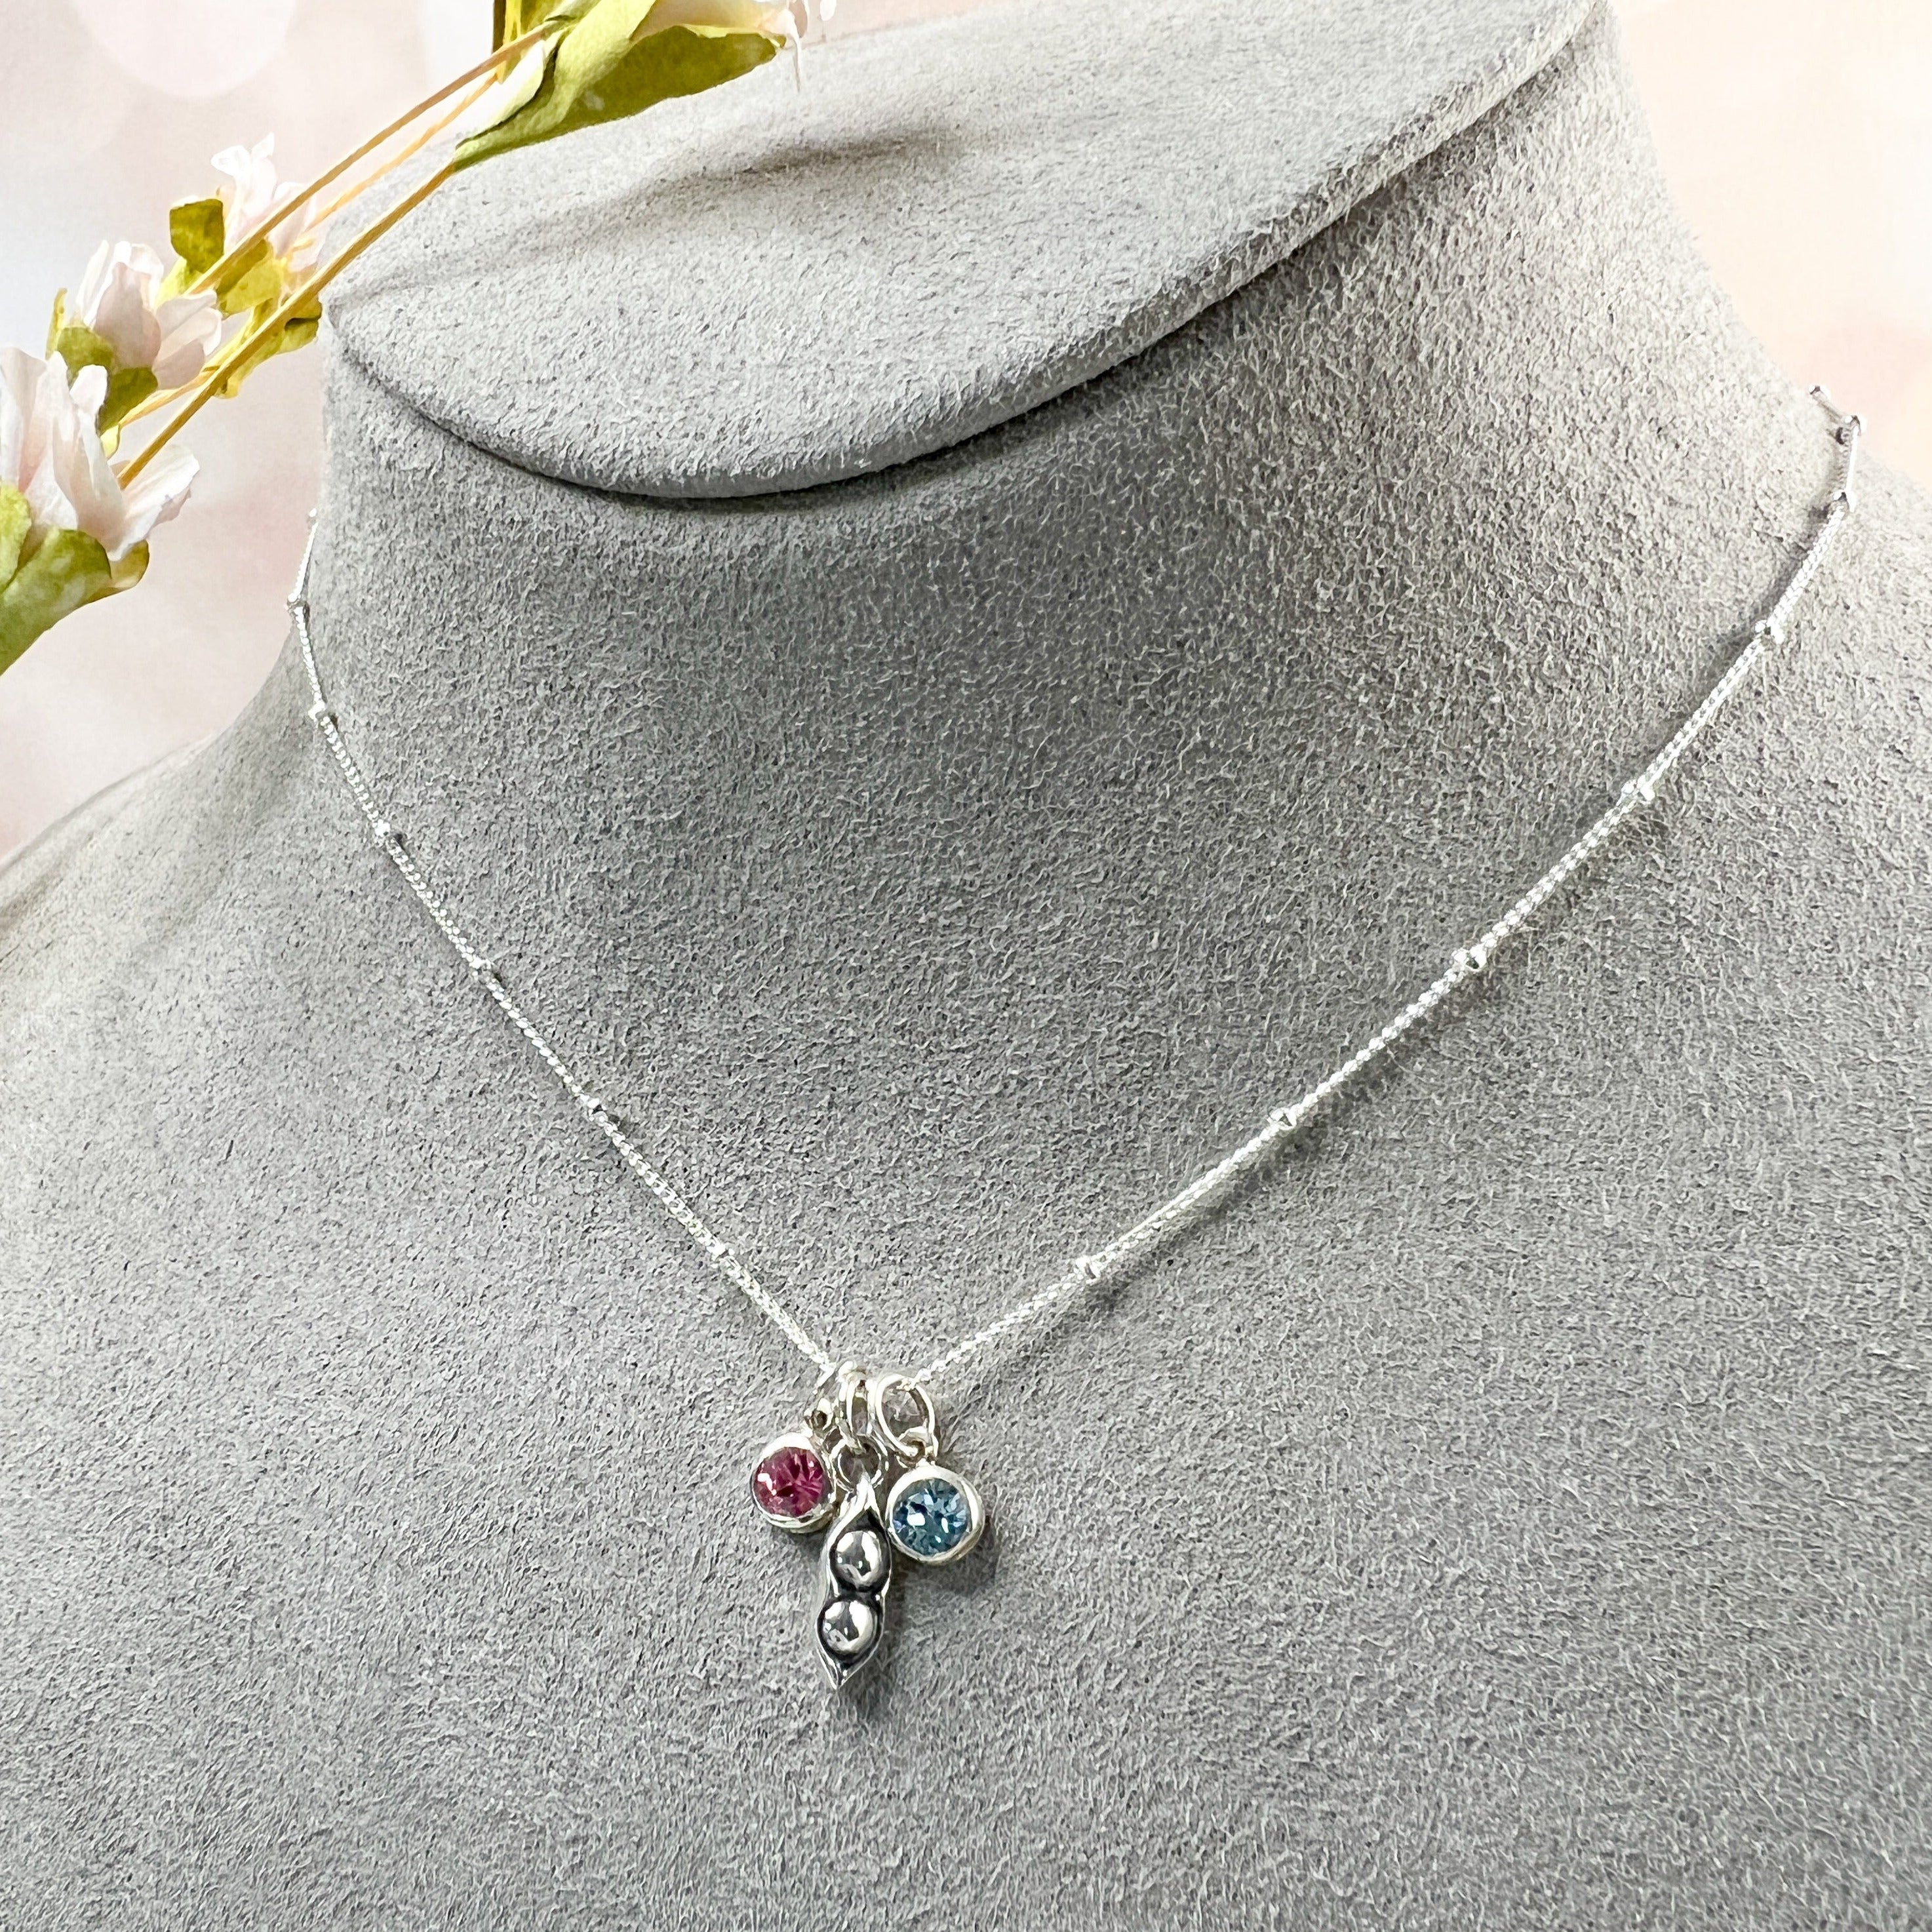 Grandma Necklace Gift for Mom Floating Charm Locket Pendant Necklace |  Unique Original Charms Personalized Birthstone Necklace - Walmart.com